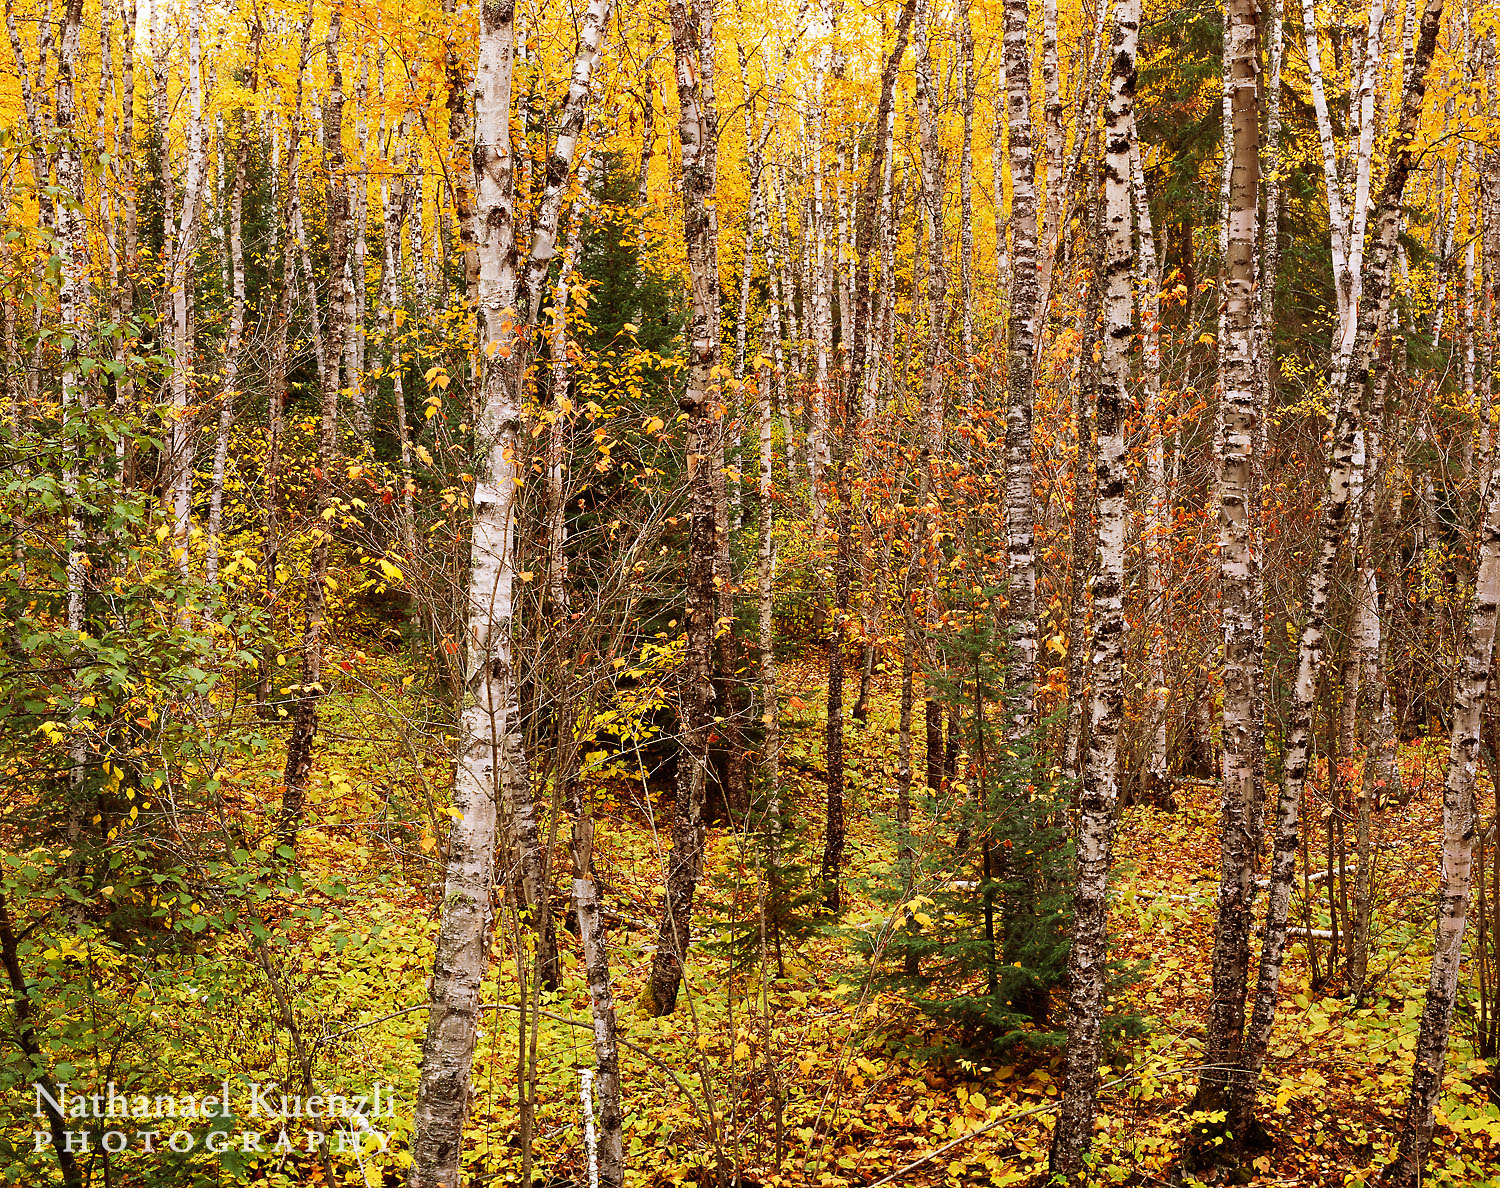   Autumn Forest, Superior National Forest, Minnesota, October 2008  